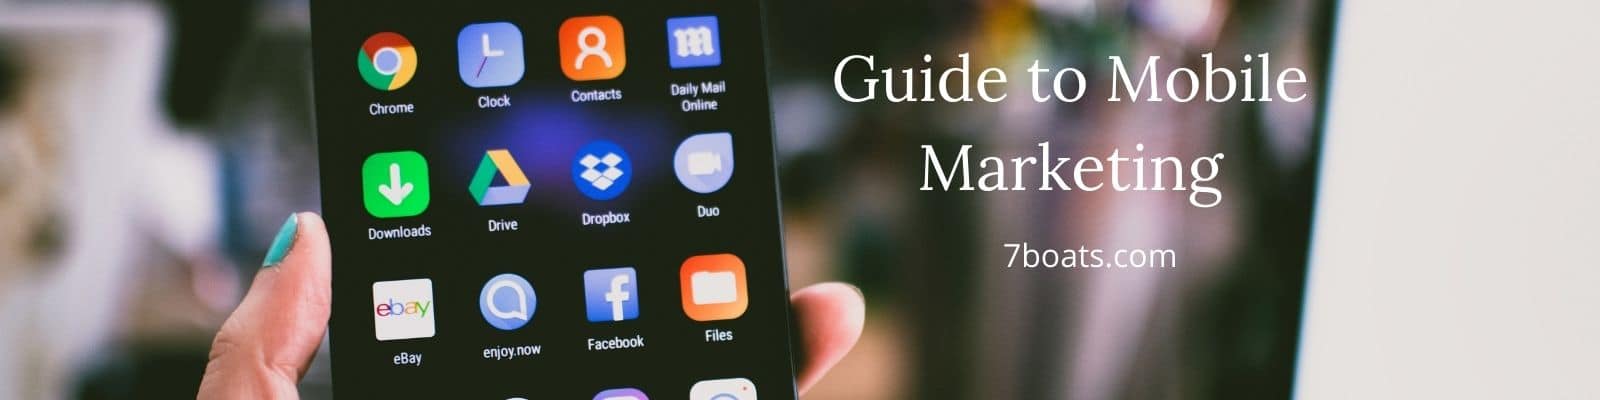 Guide to Mobile Marketing